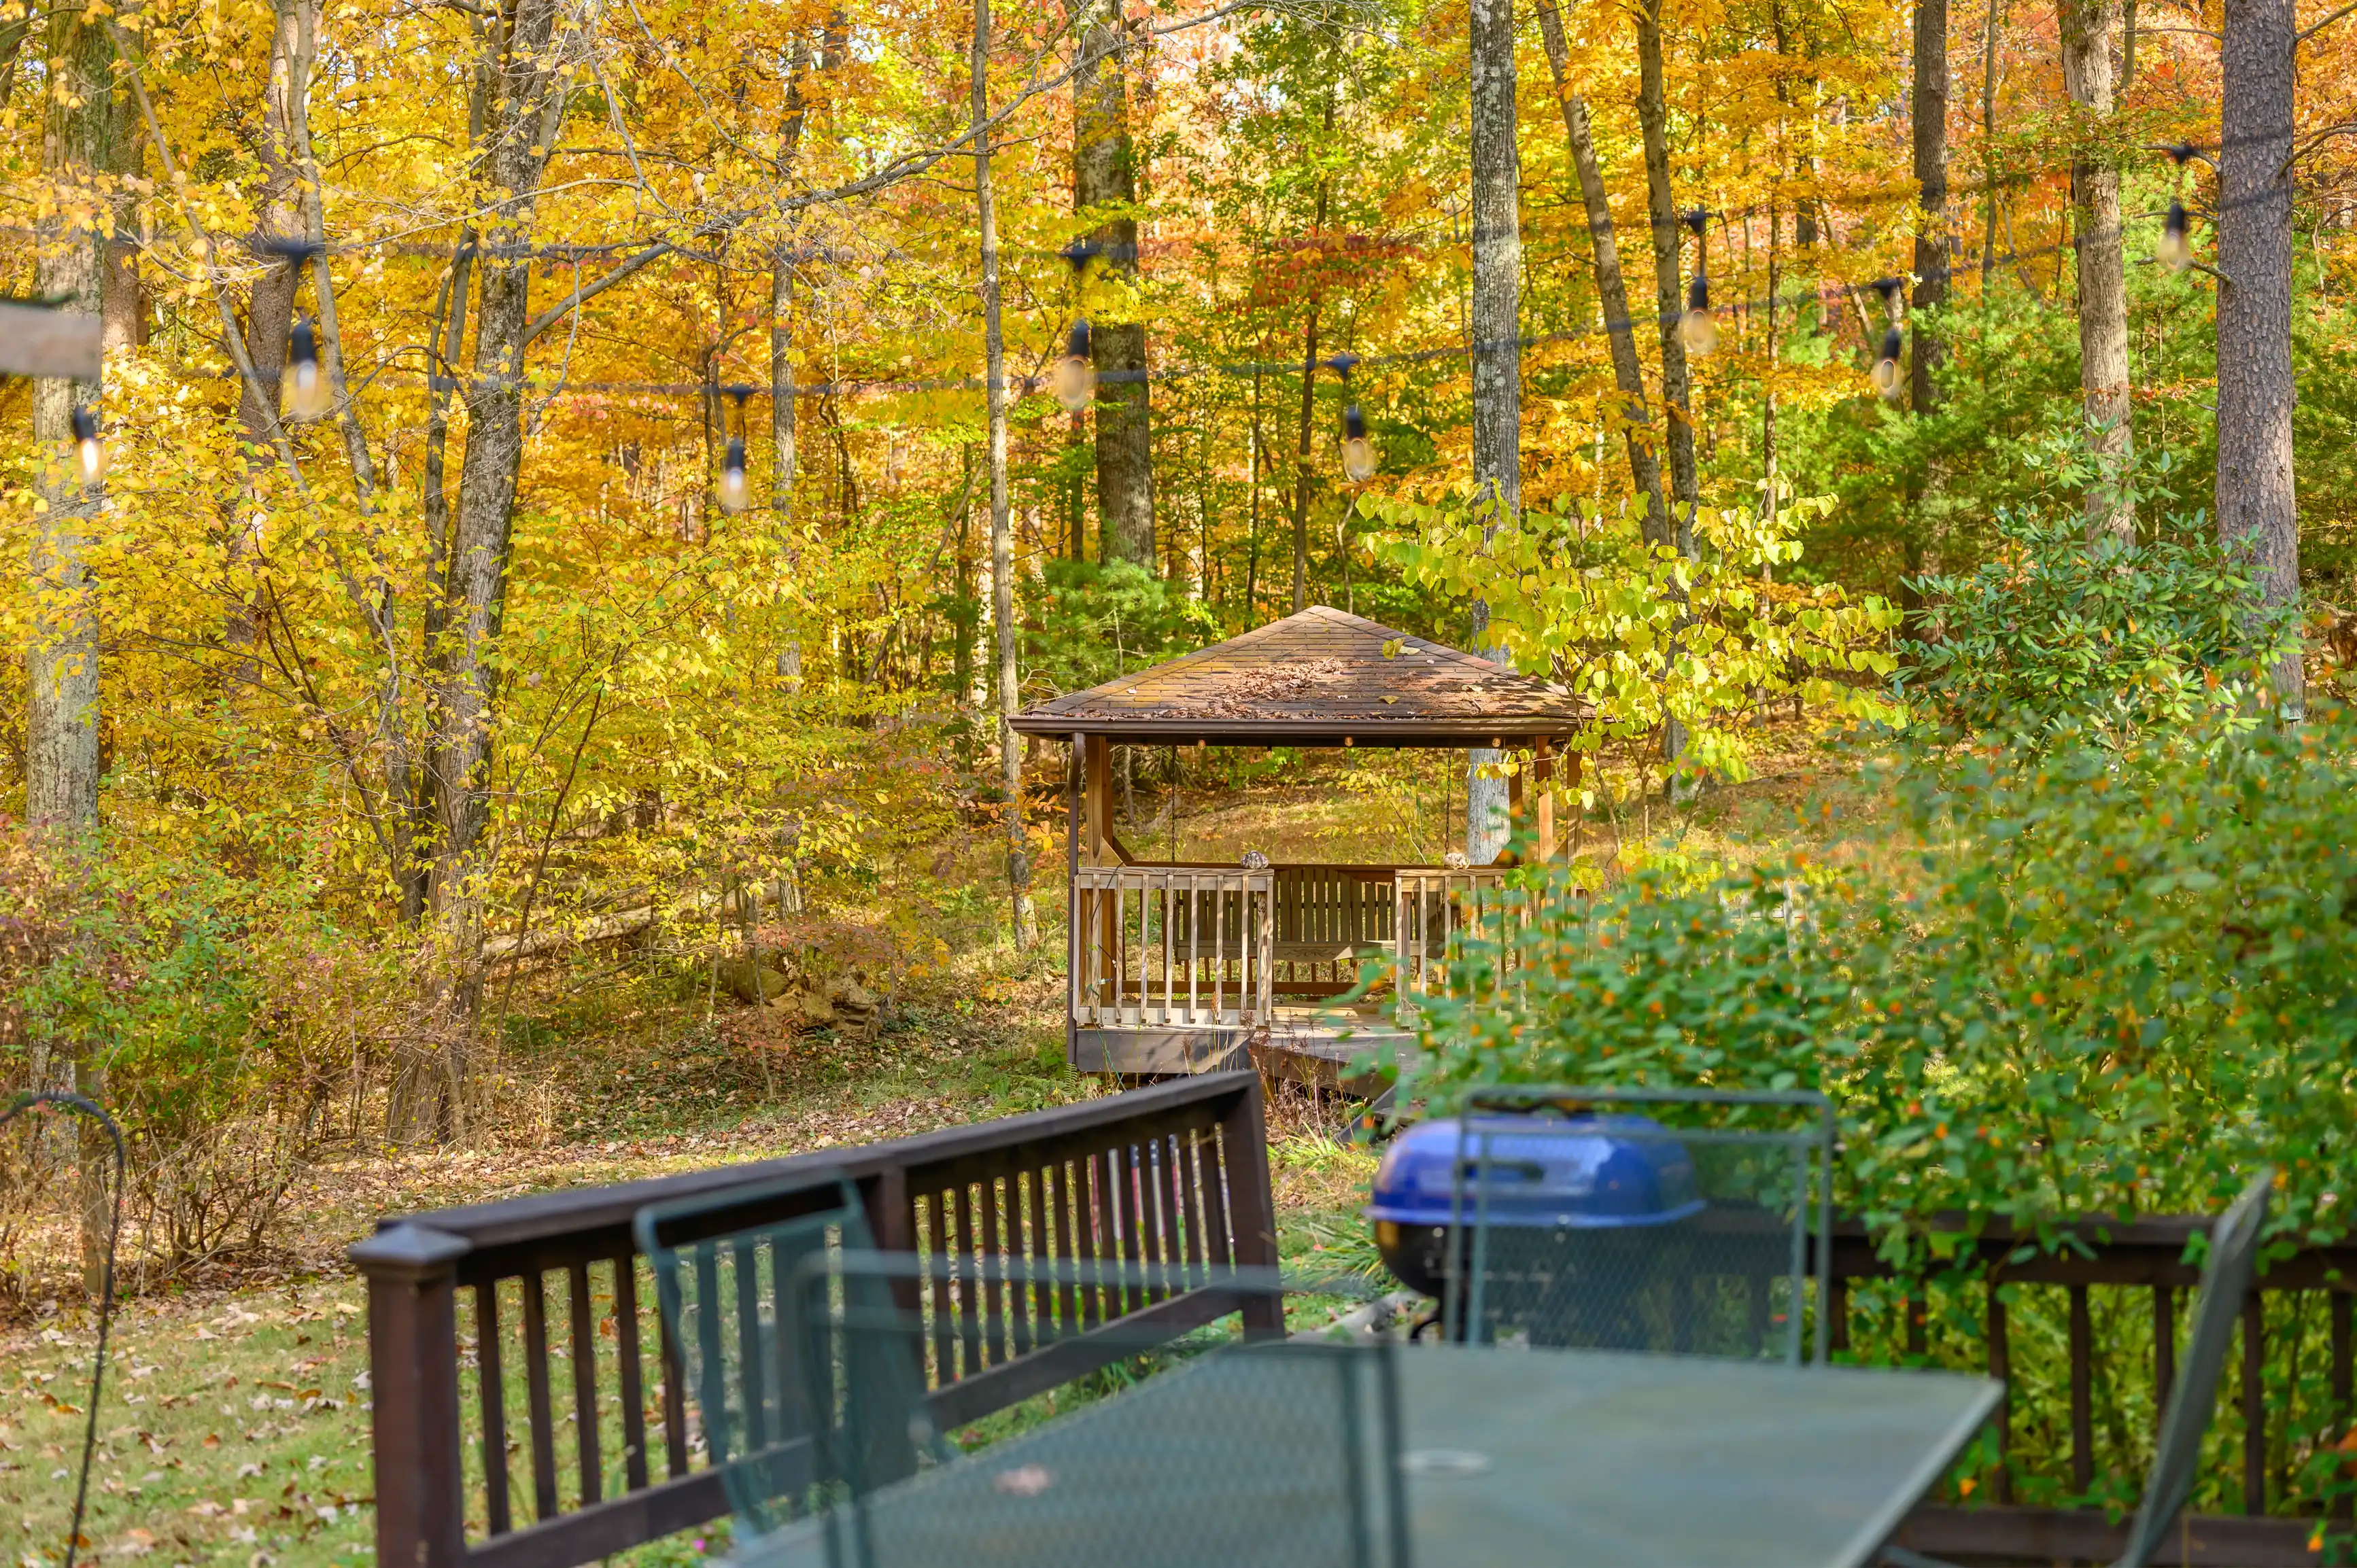 Autumn backyard with a wooden gazebo surrounded by trees with yellow and green leaves, viewed from a deck with a glass table.